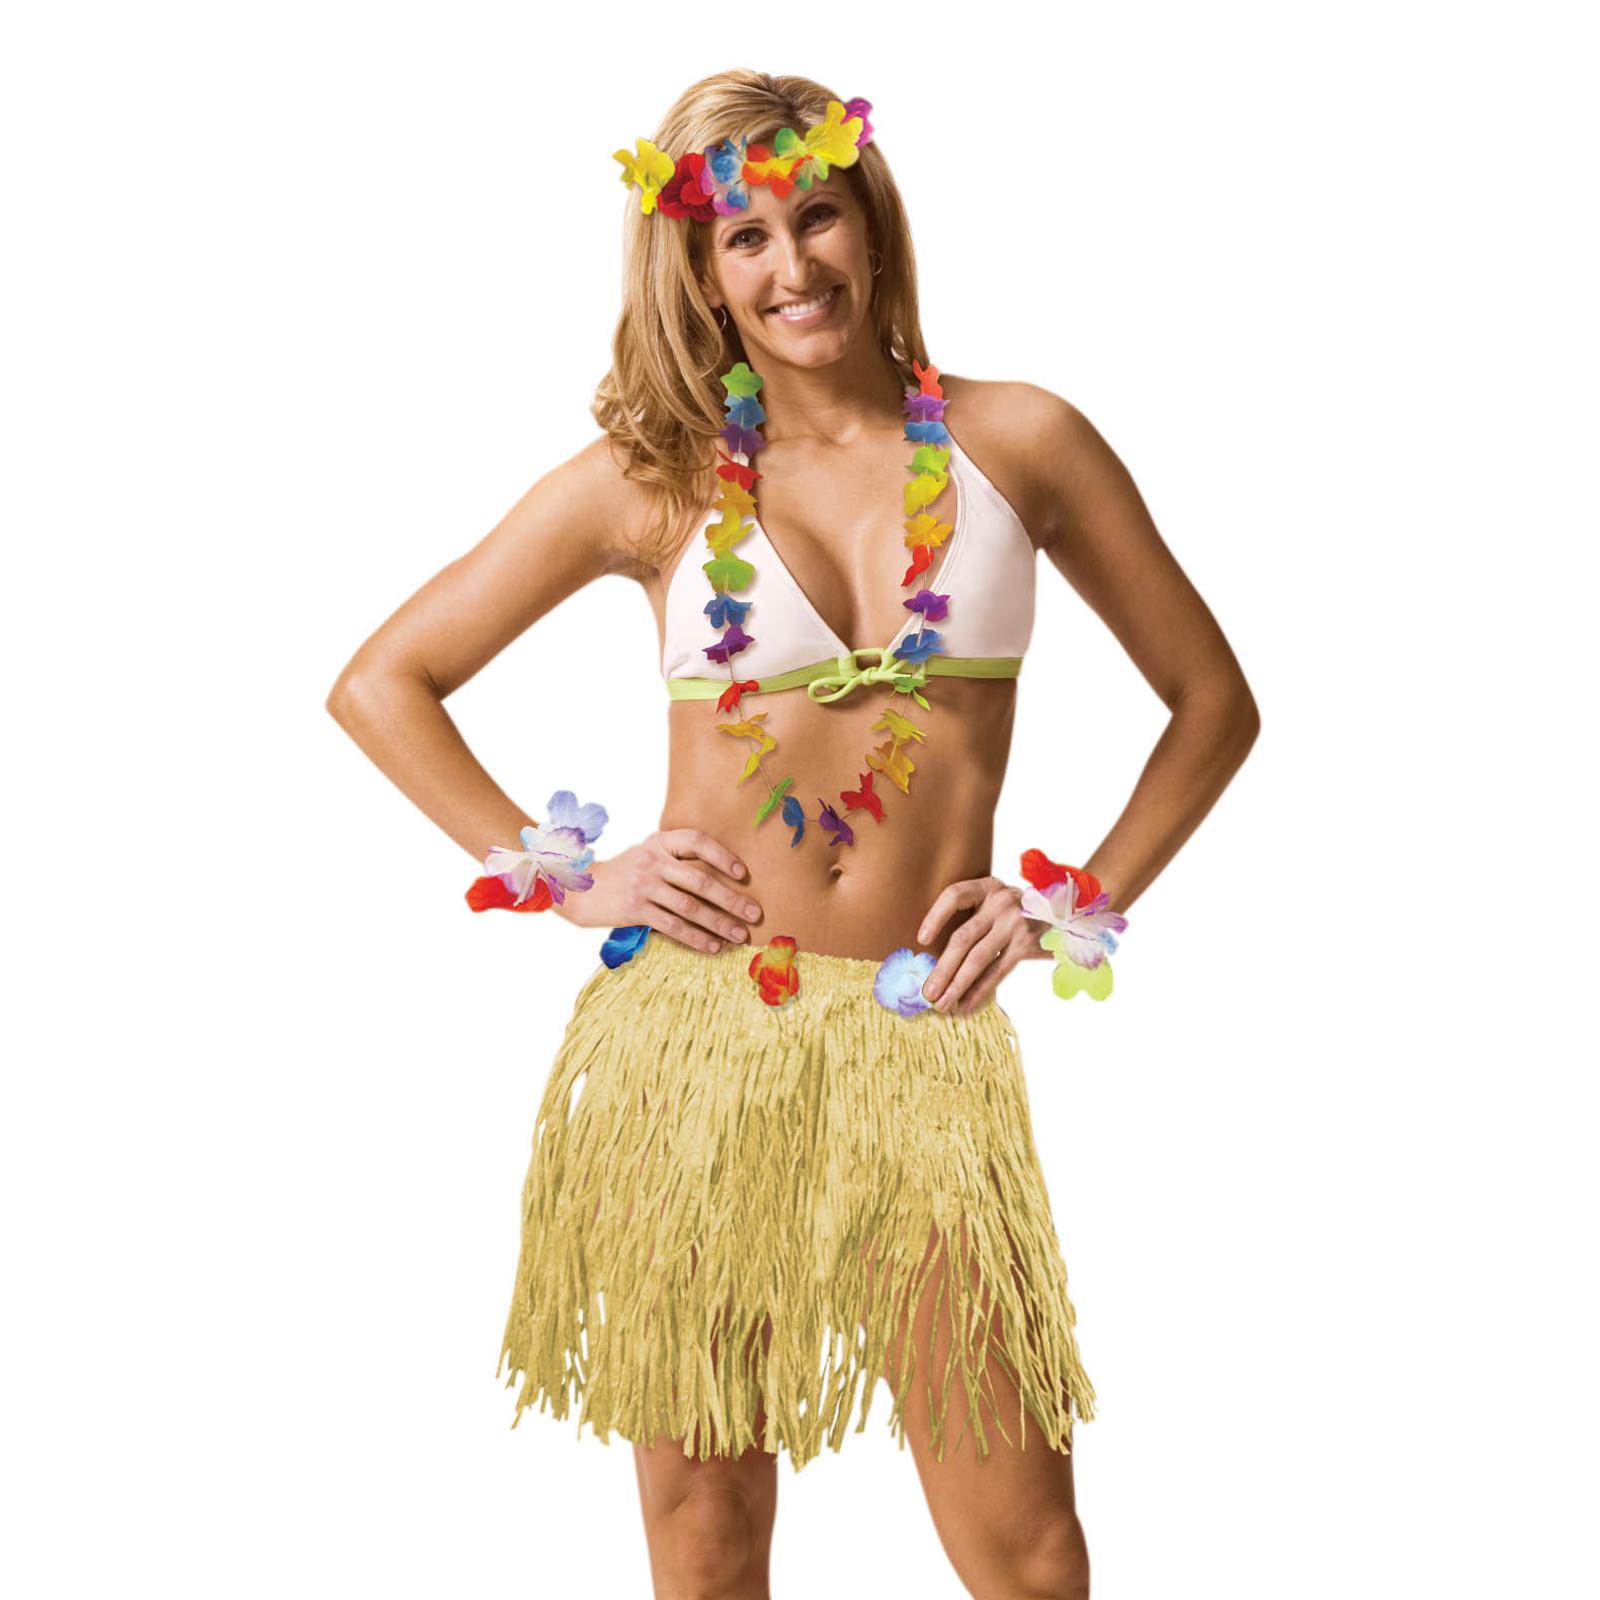 Adult XL Plastic Luau Skirt Adult XL 18 x 42in Costumes & Apparel - Party Centre